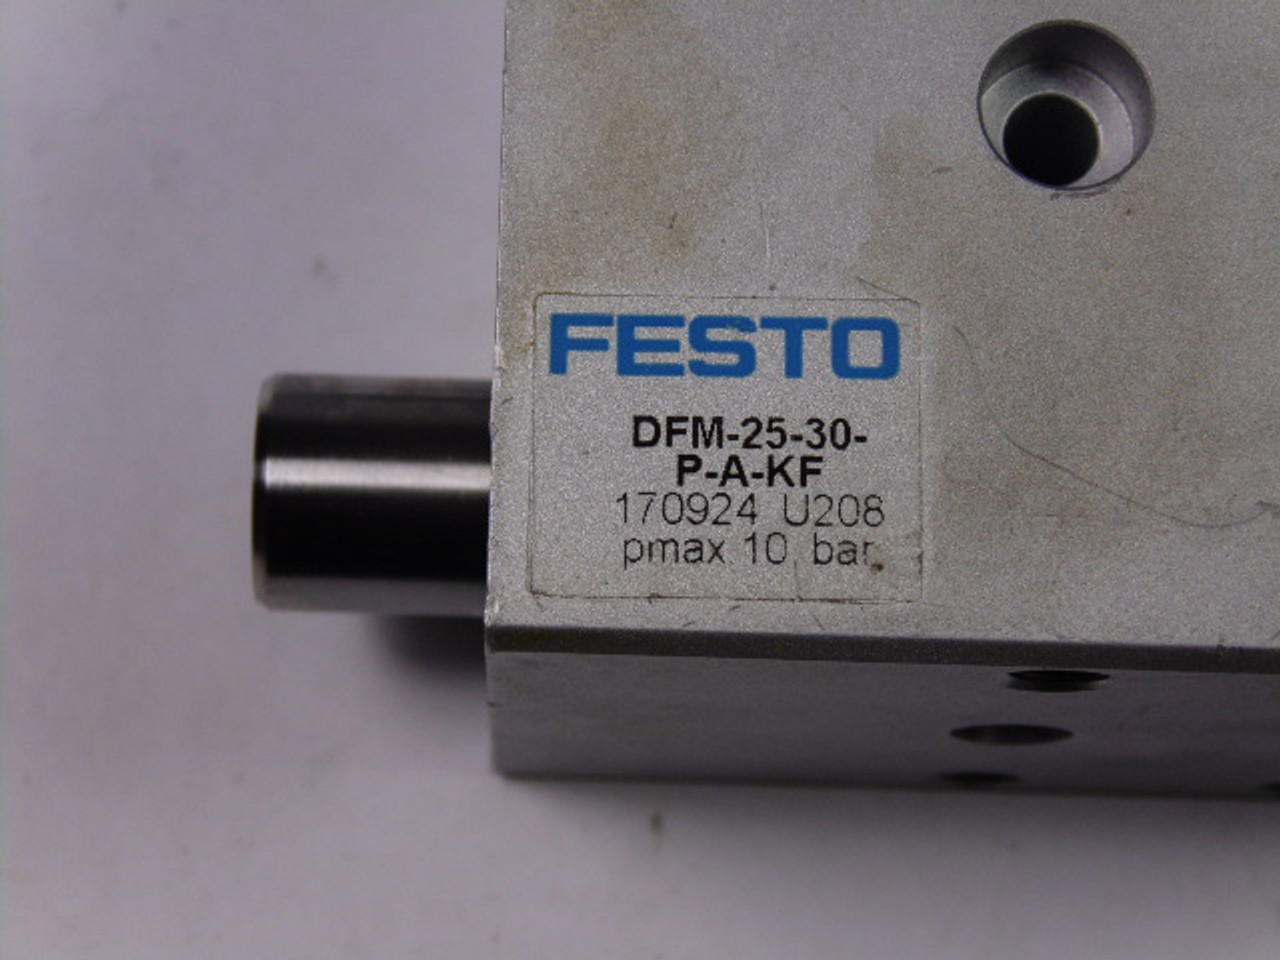 Festo DFM-25-30-P-A-KF Pneumatic Guide Cylinder USED